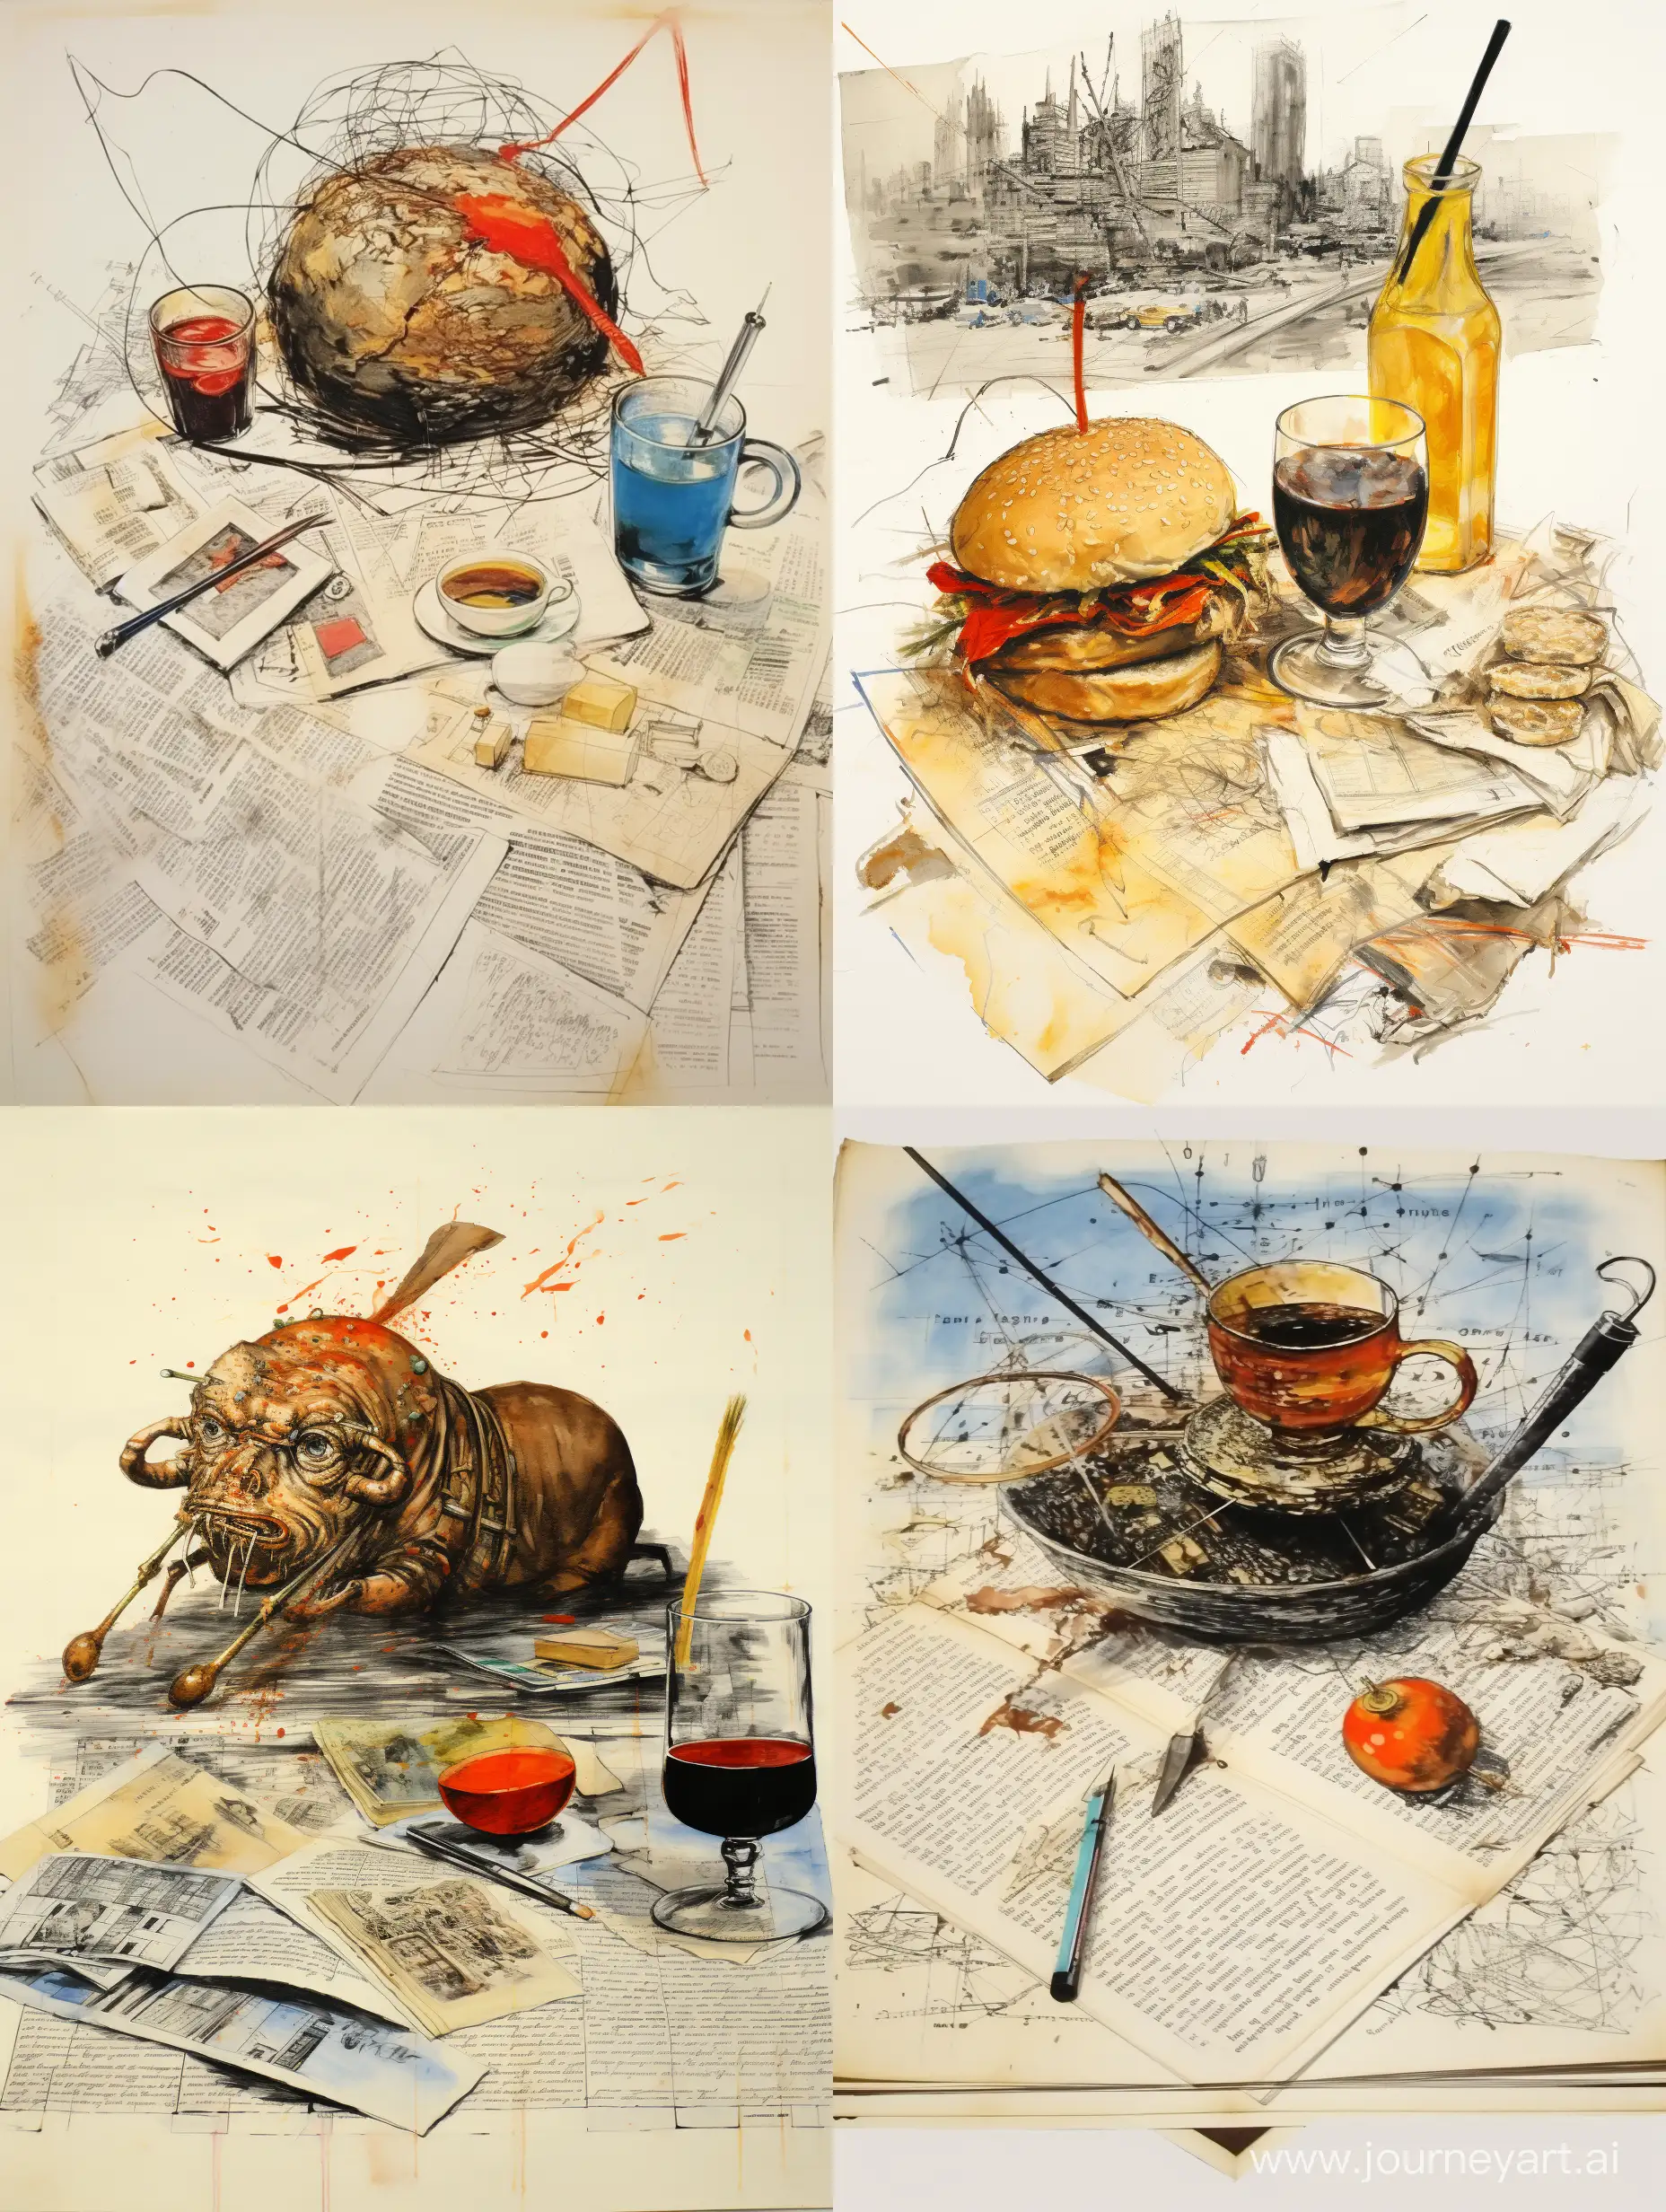 Chaotic-Culinary-Aftermath-HalfEaten-Burger-Whiskey-and-Messy-Manuscript